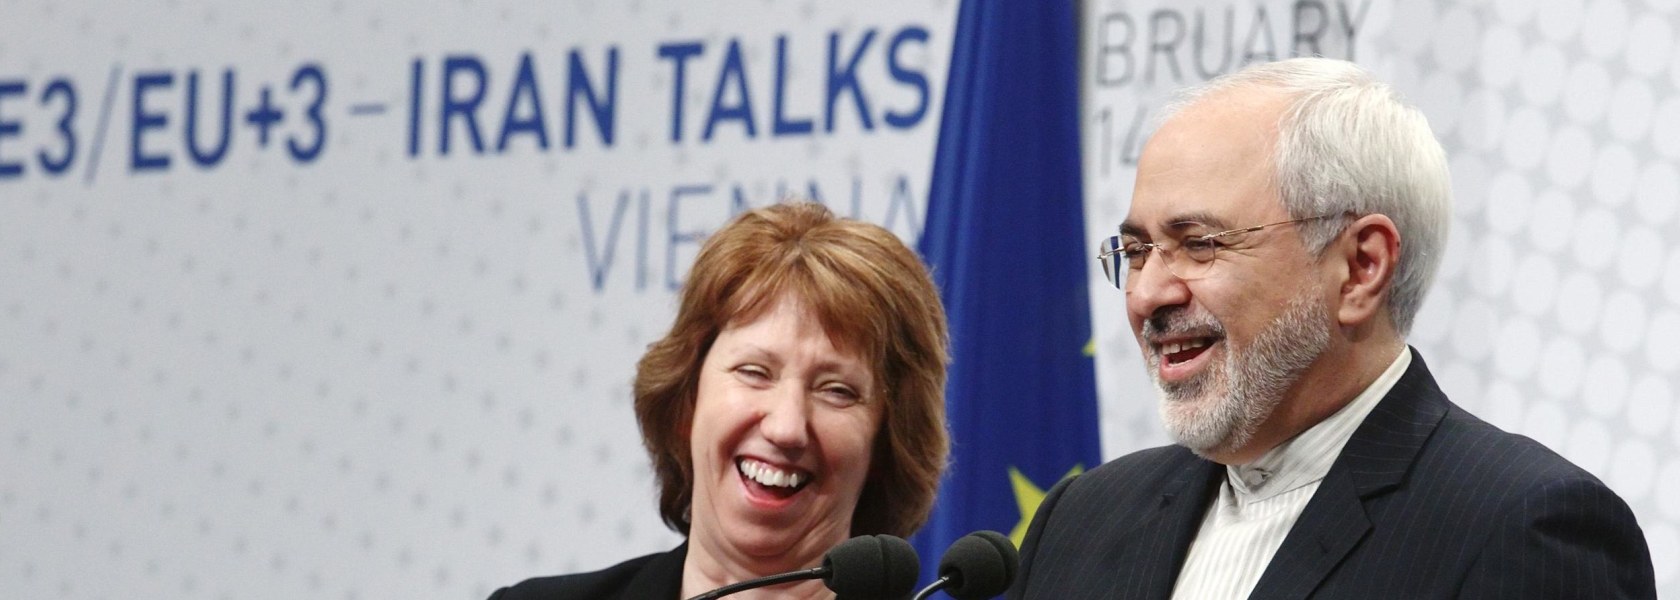 Image: European Union foreign policy chief Ashton and Iranian Foreign Minister Zarif share a laugh during a press statement after a conference in Vienna